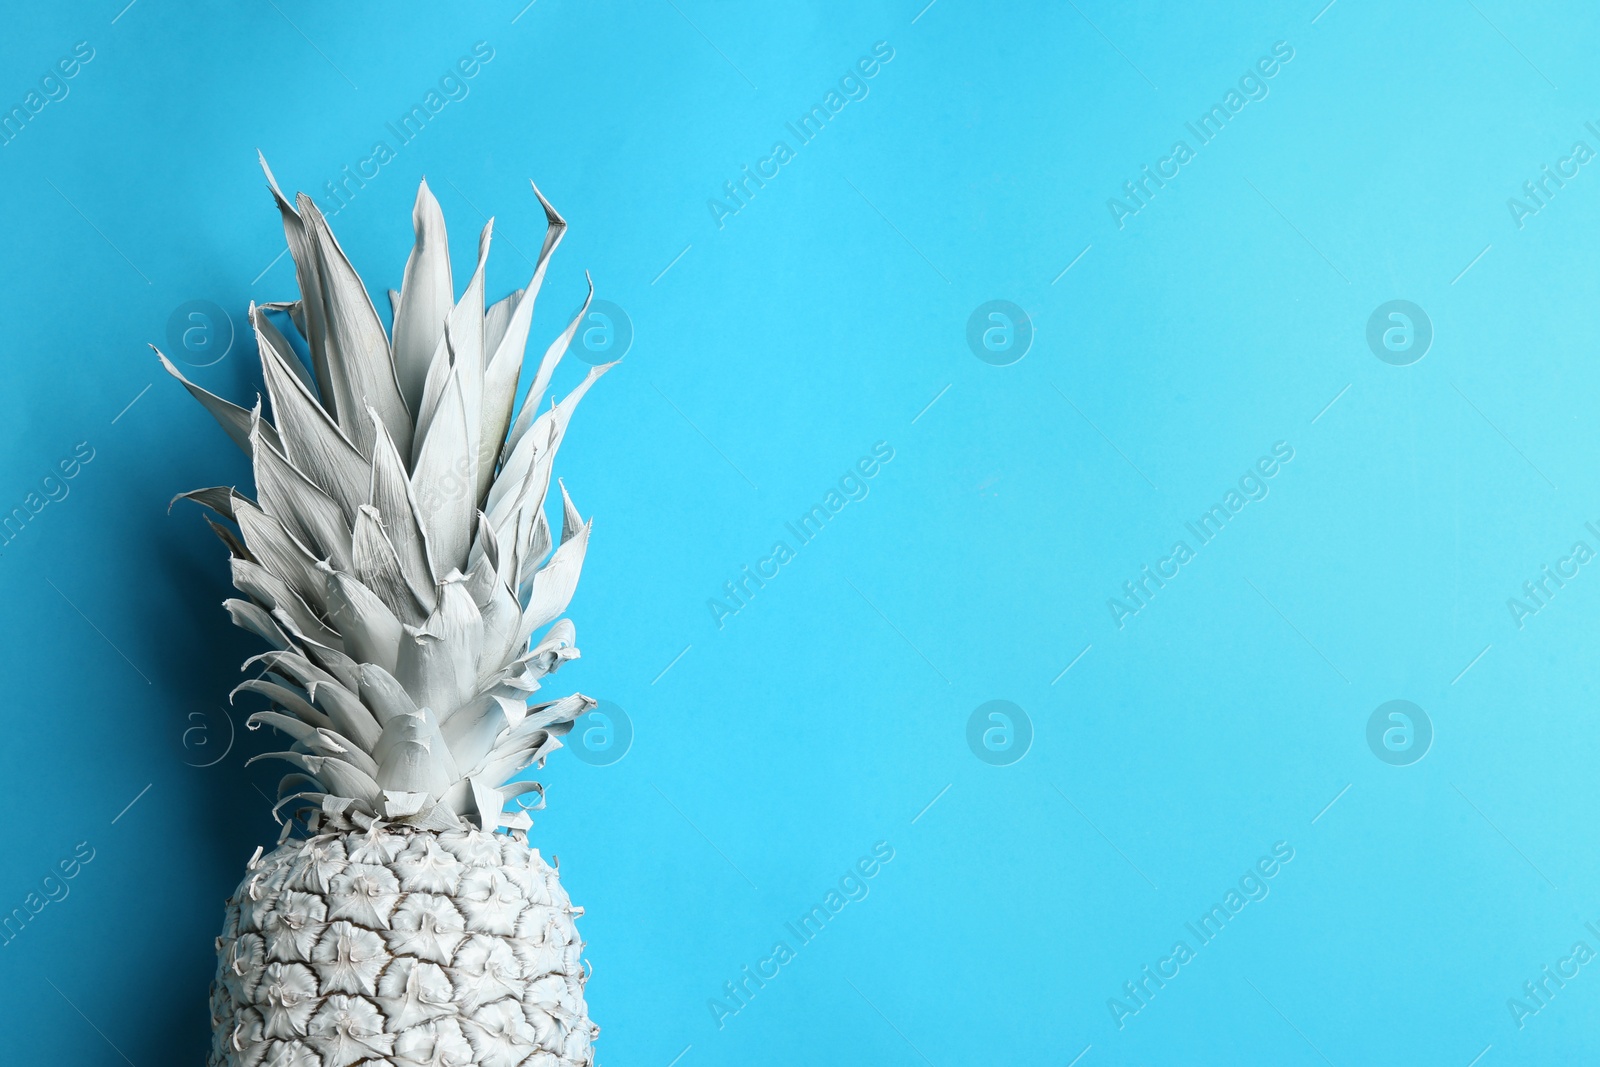 Photo of White pineapple on light blue background, top view with space for text. Creative concept